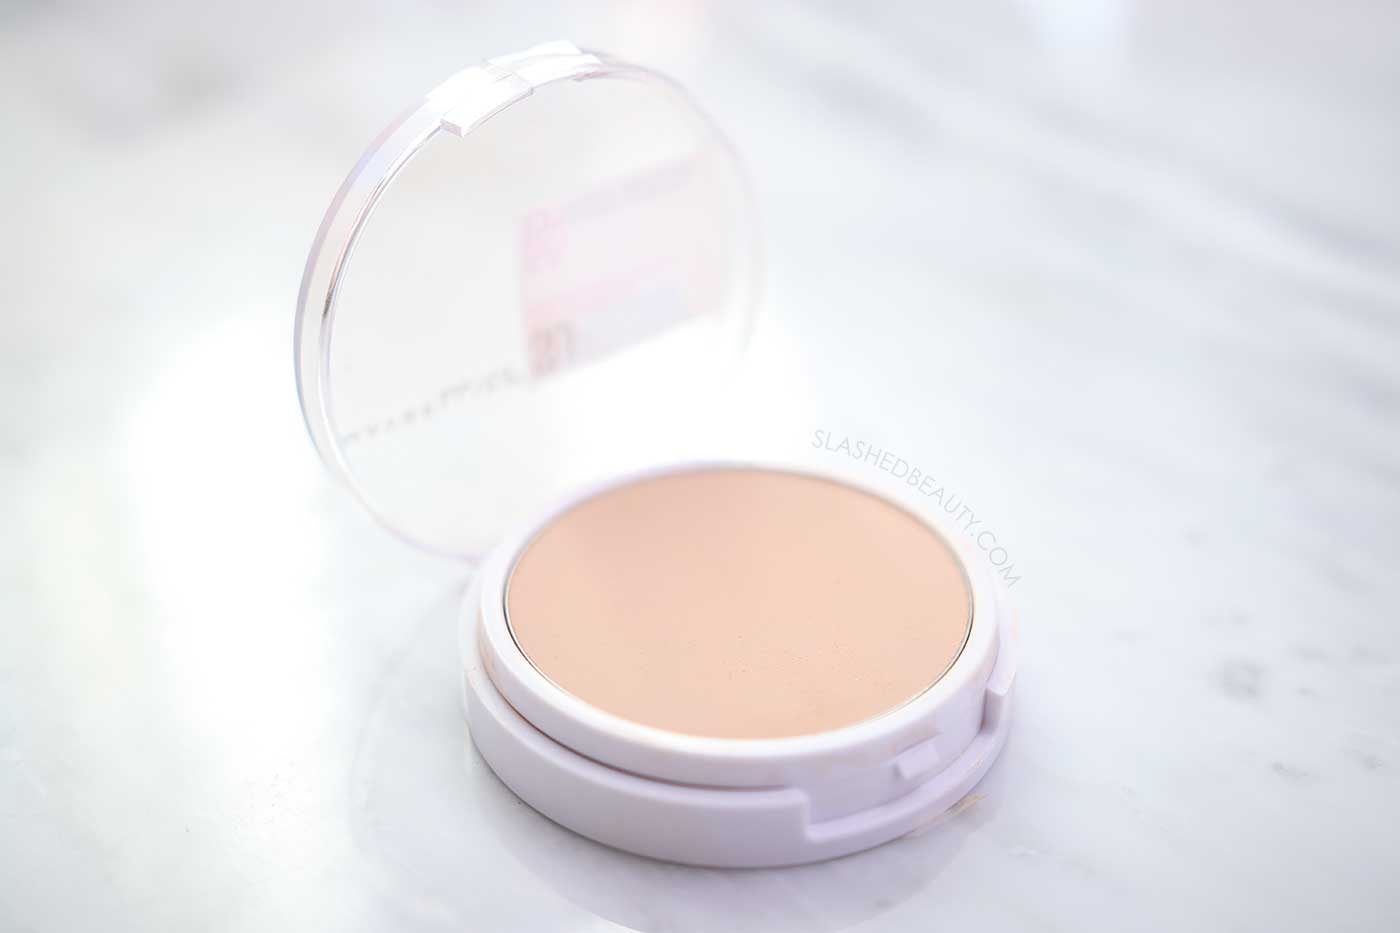 Maybelline SuperStay Powder Foundation Review | Slashed Beauty